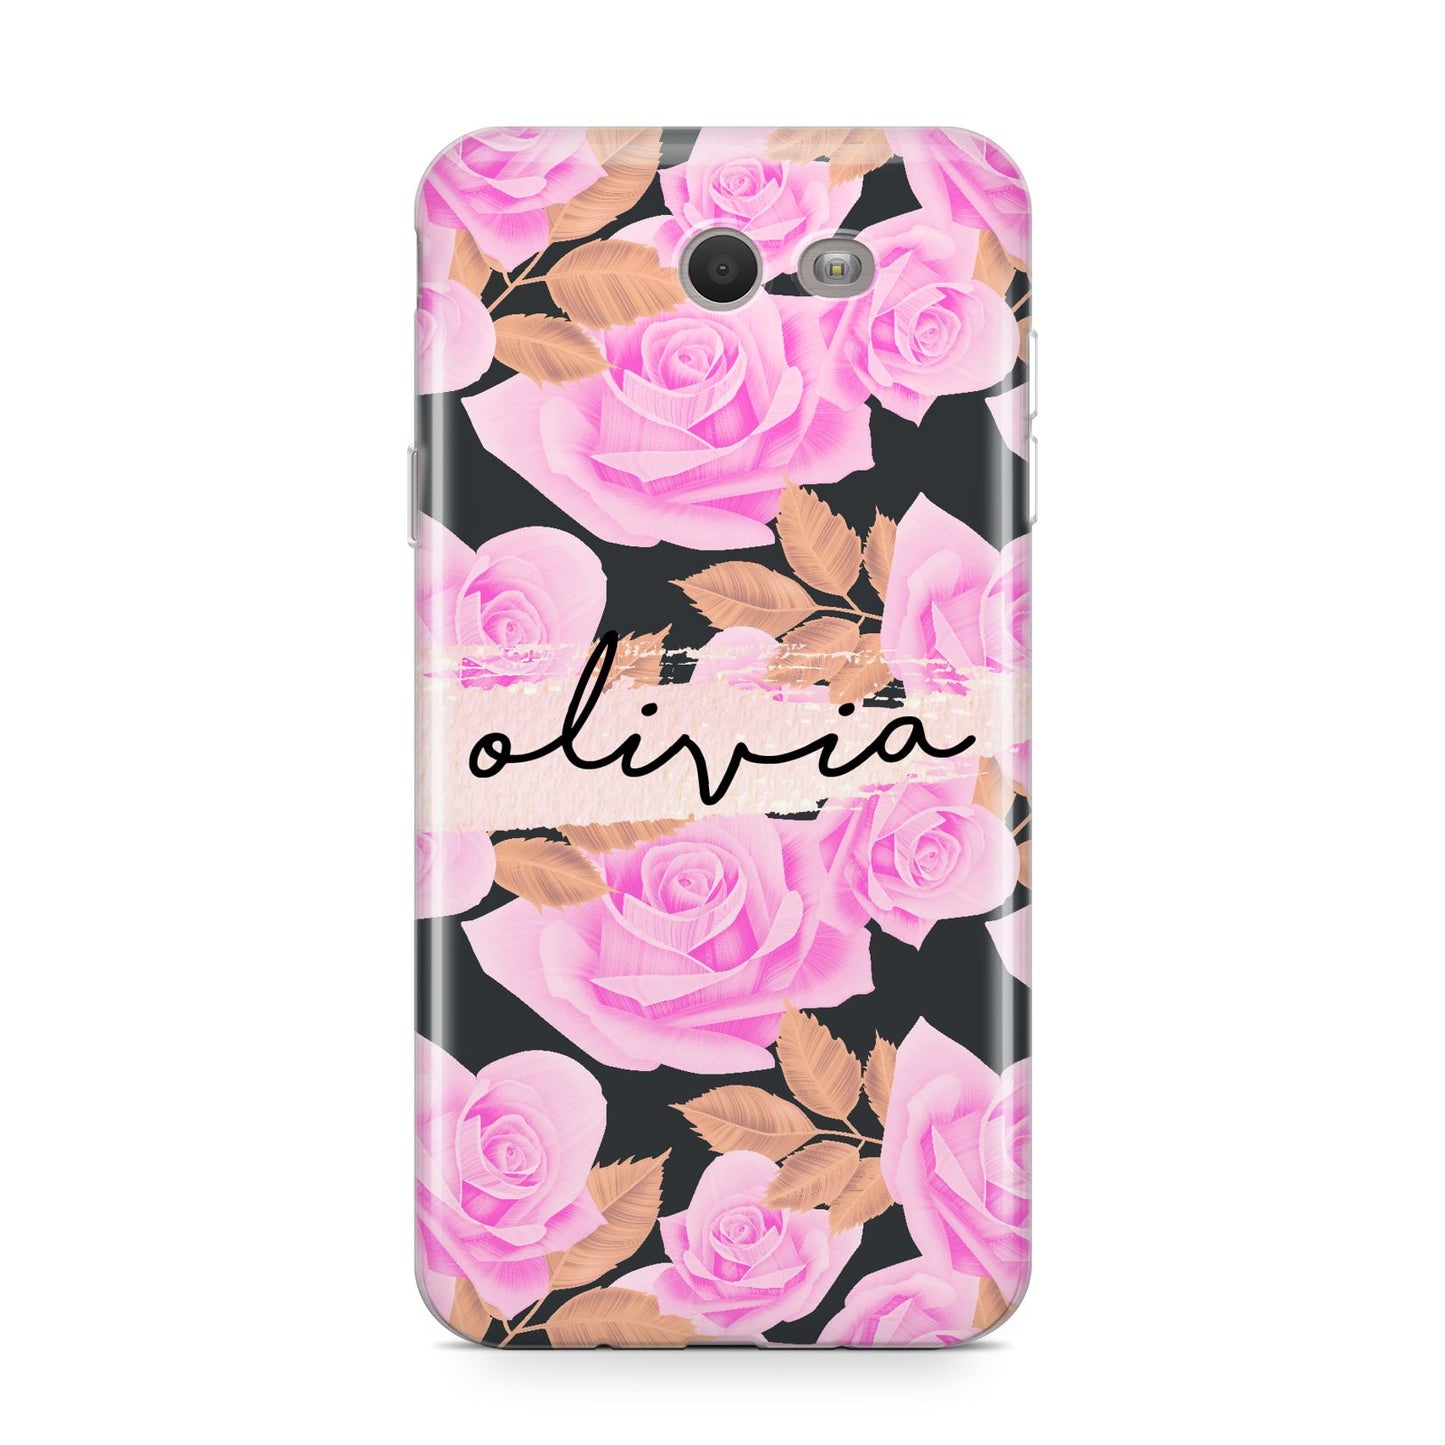 Personalised Floral Pink Roses Samsung Galaxy J7 2017 Case